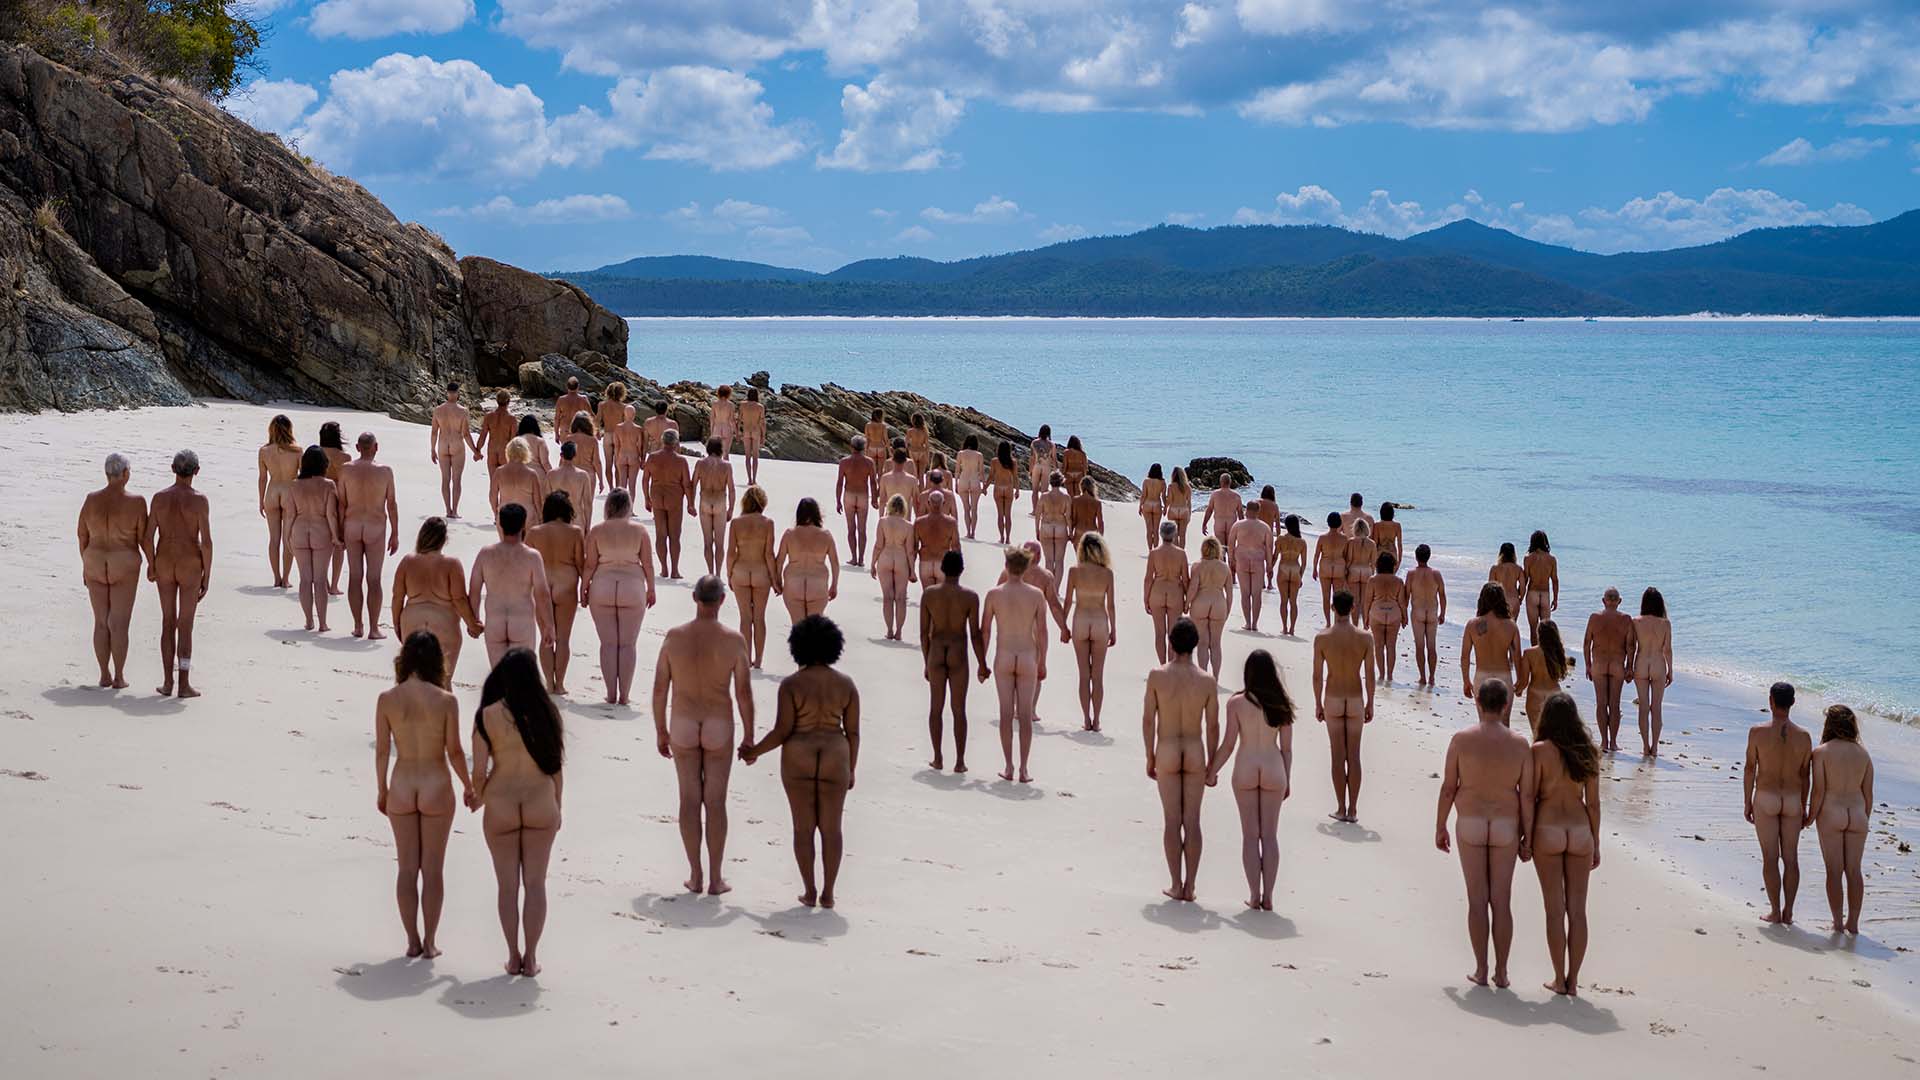 Artist Spencer Tunick Has Revealed the Images from His Mass Nude Photo Shoot in the Whitsundays